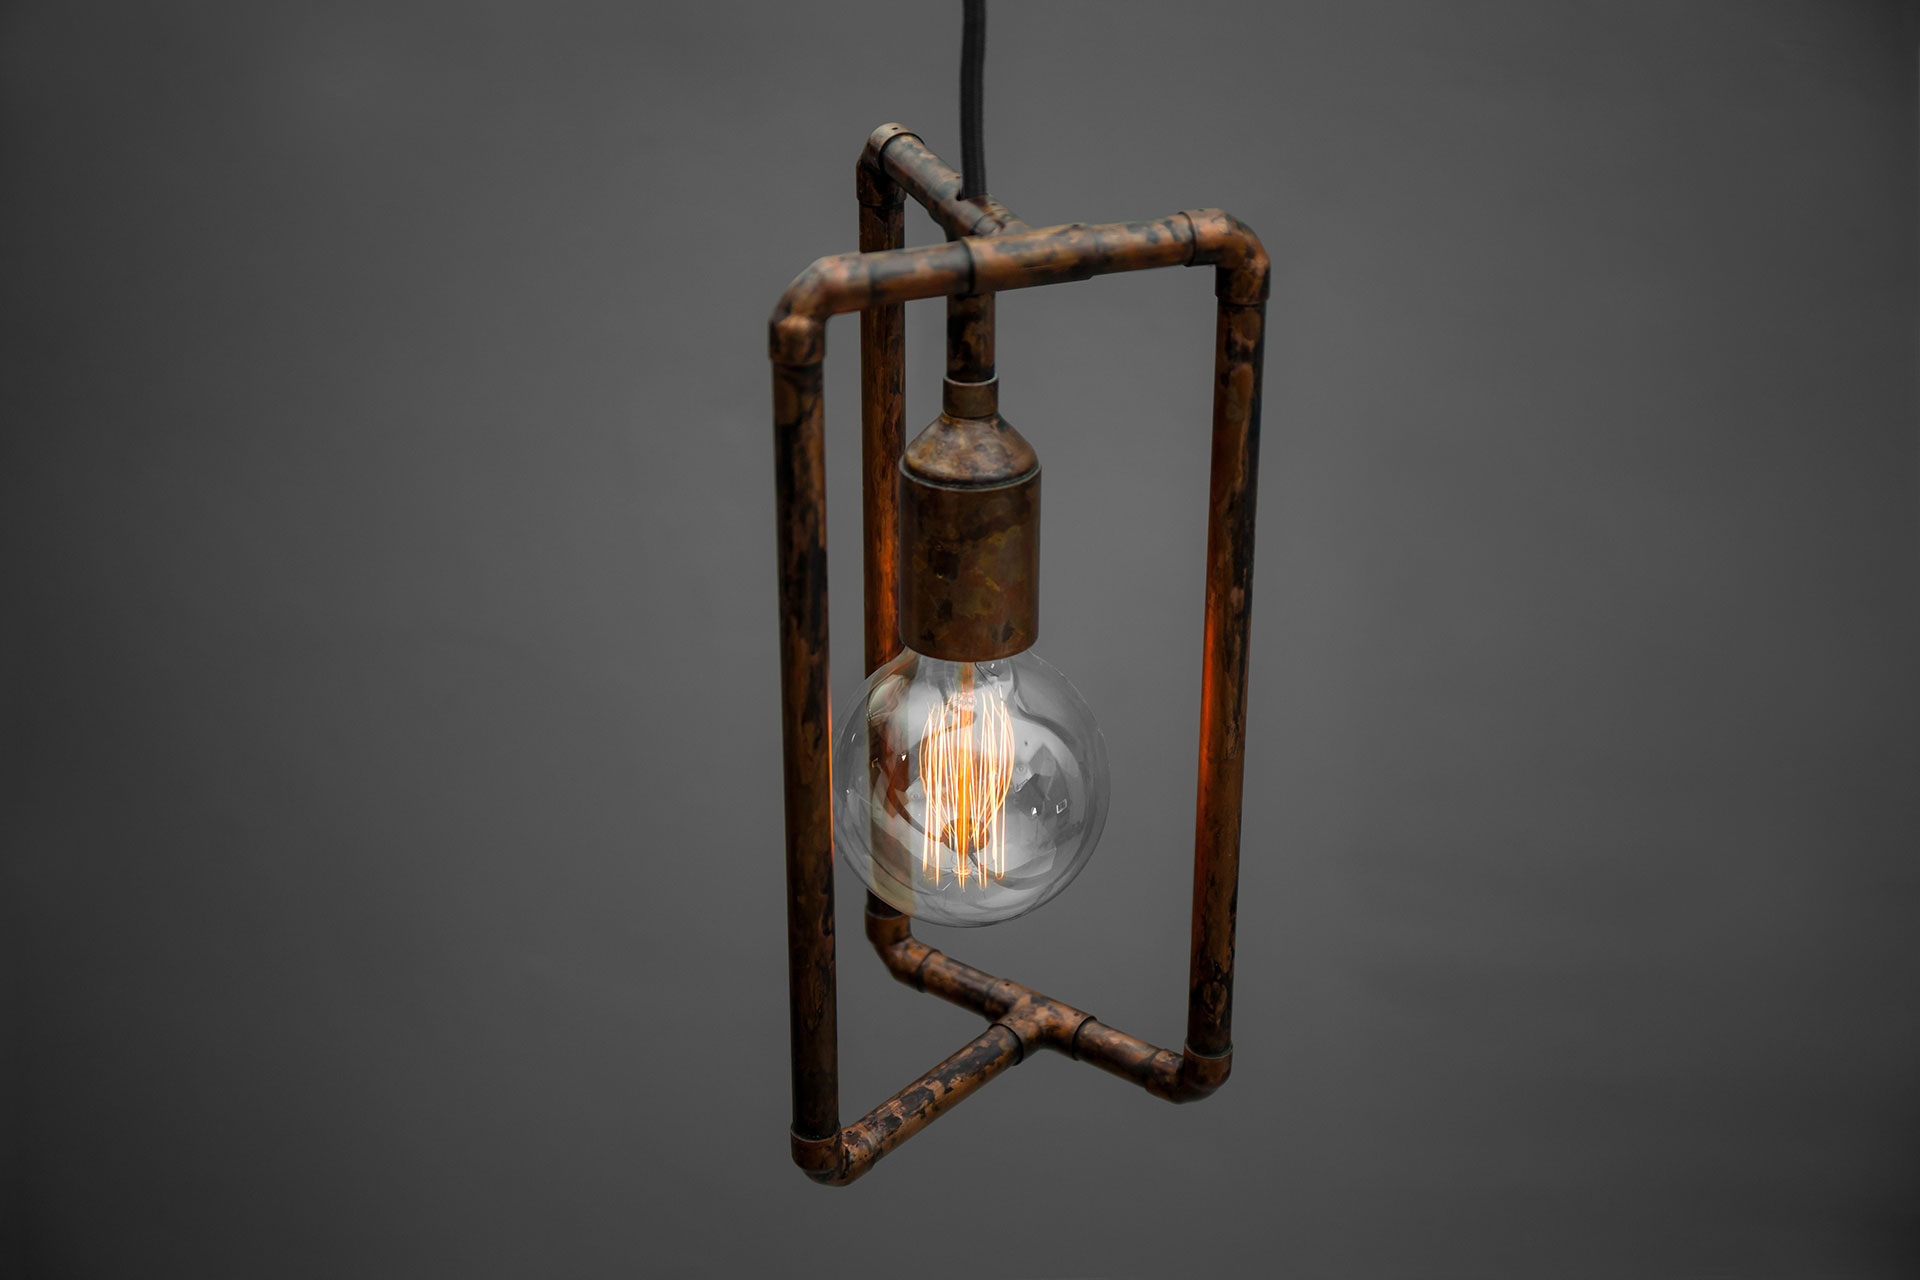 Vintage industrial ceiling lamp in aged copper metal finish